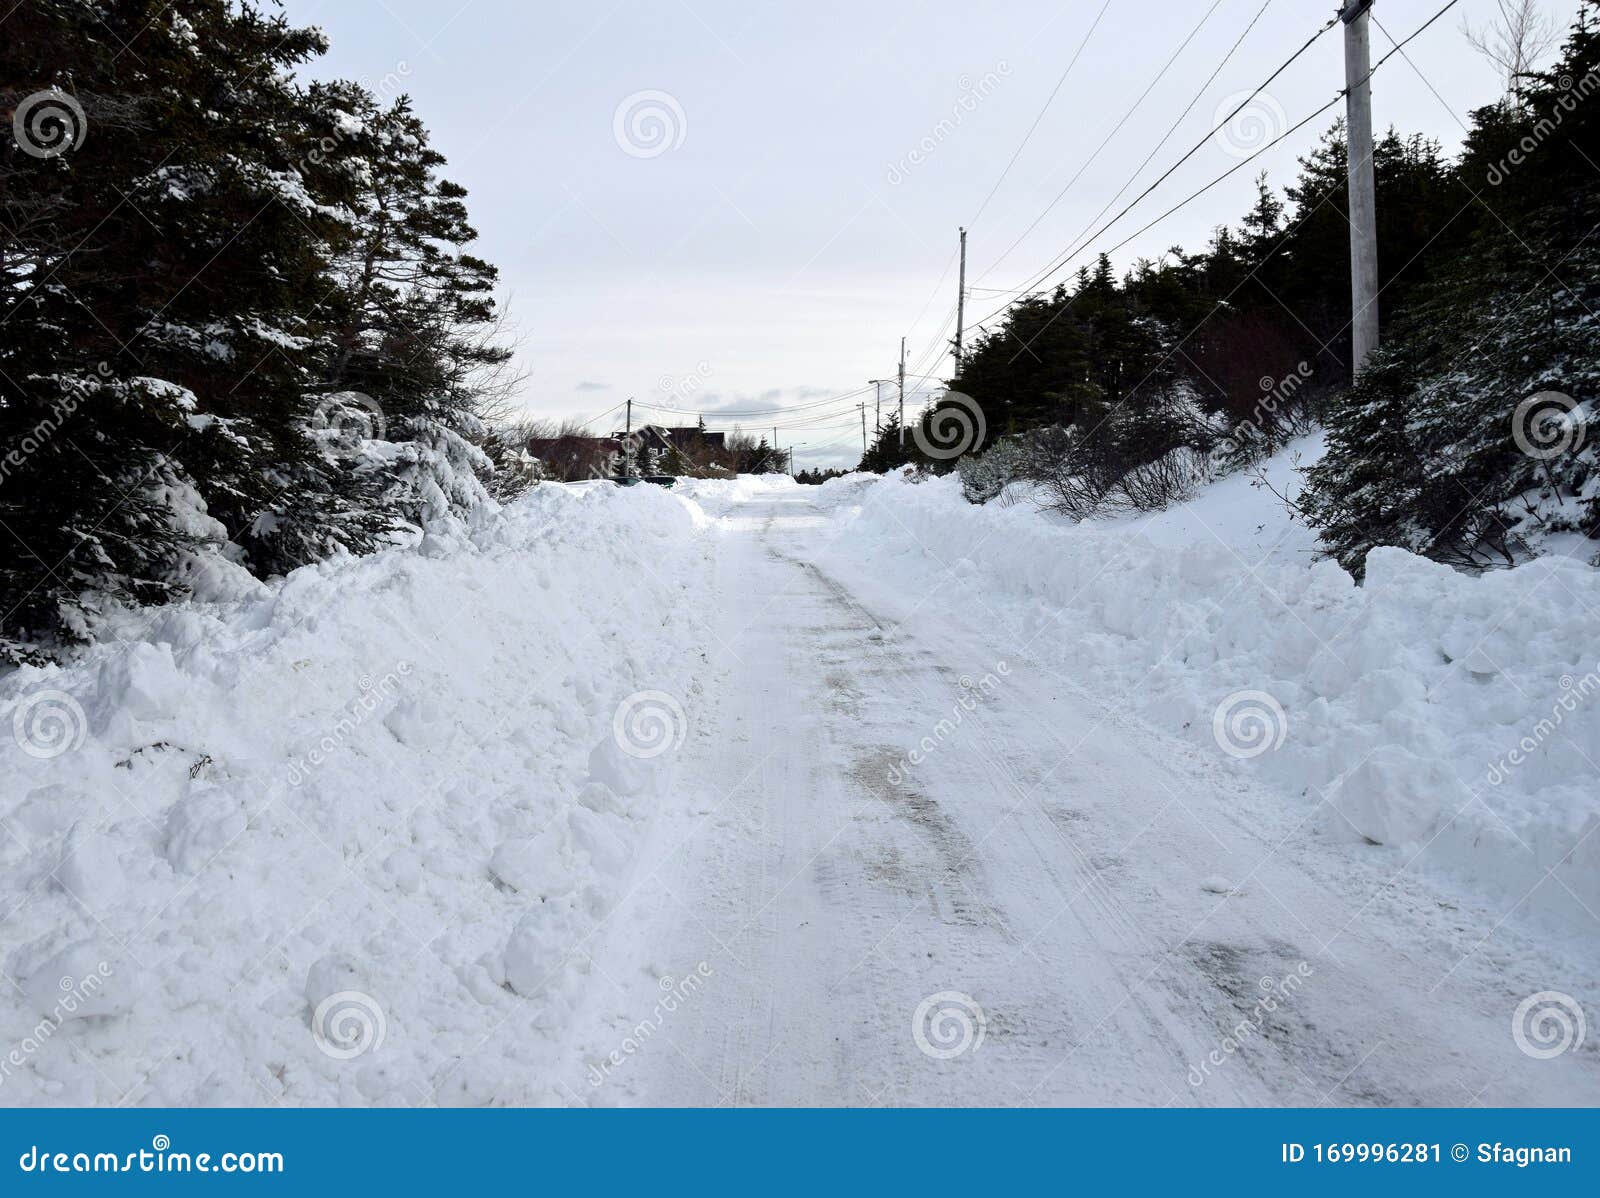 Snow Covered Road through a Forest Stock Image - Image of weather ...